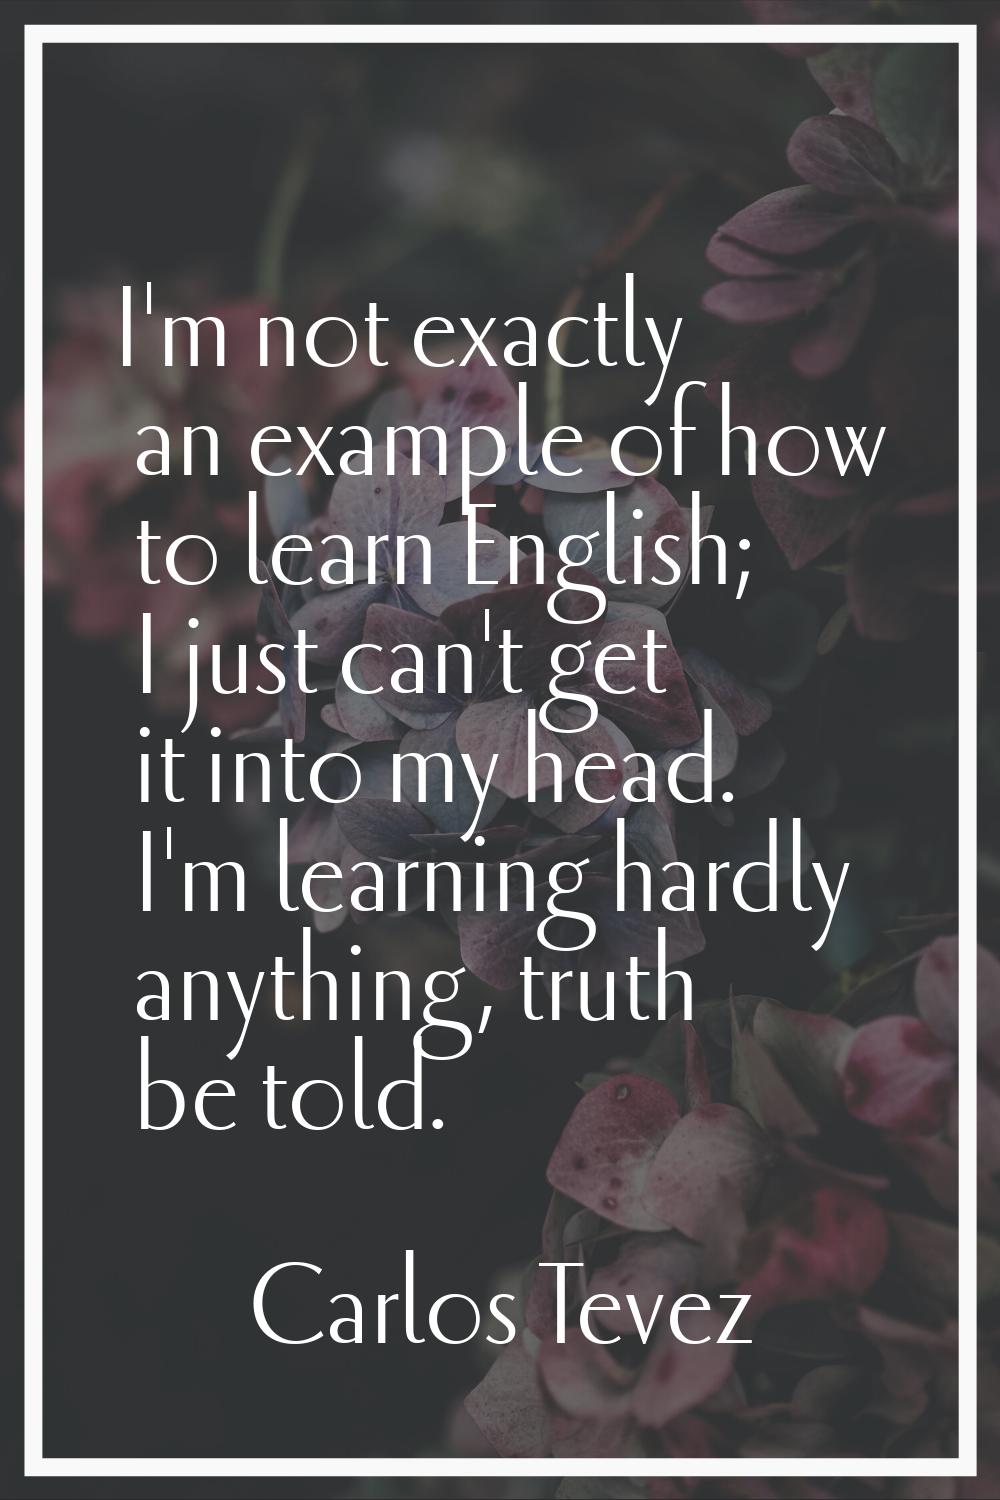 I'm not exactly an example of how to learn English; I just can't get it into my head. I'm learning 